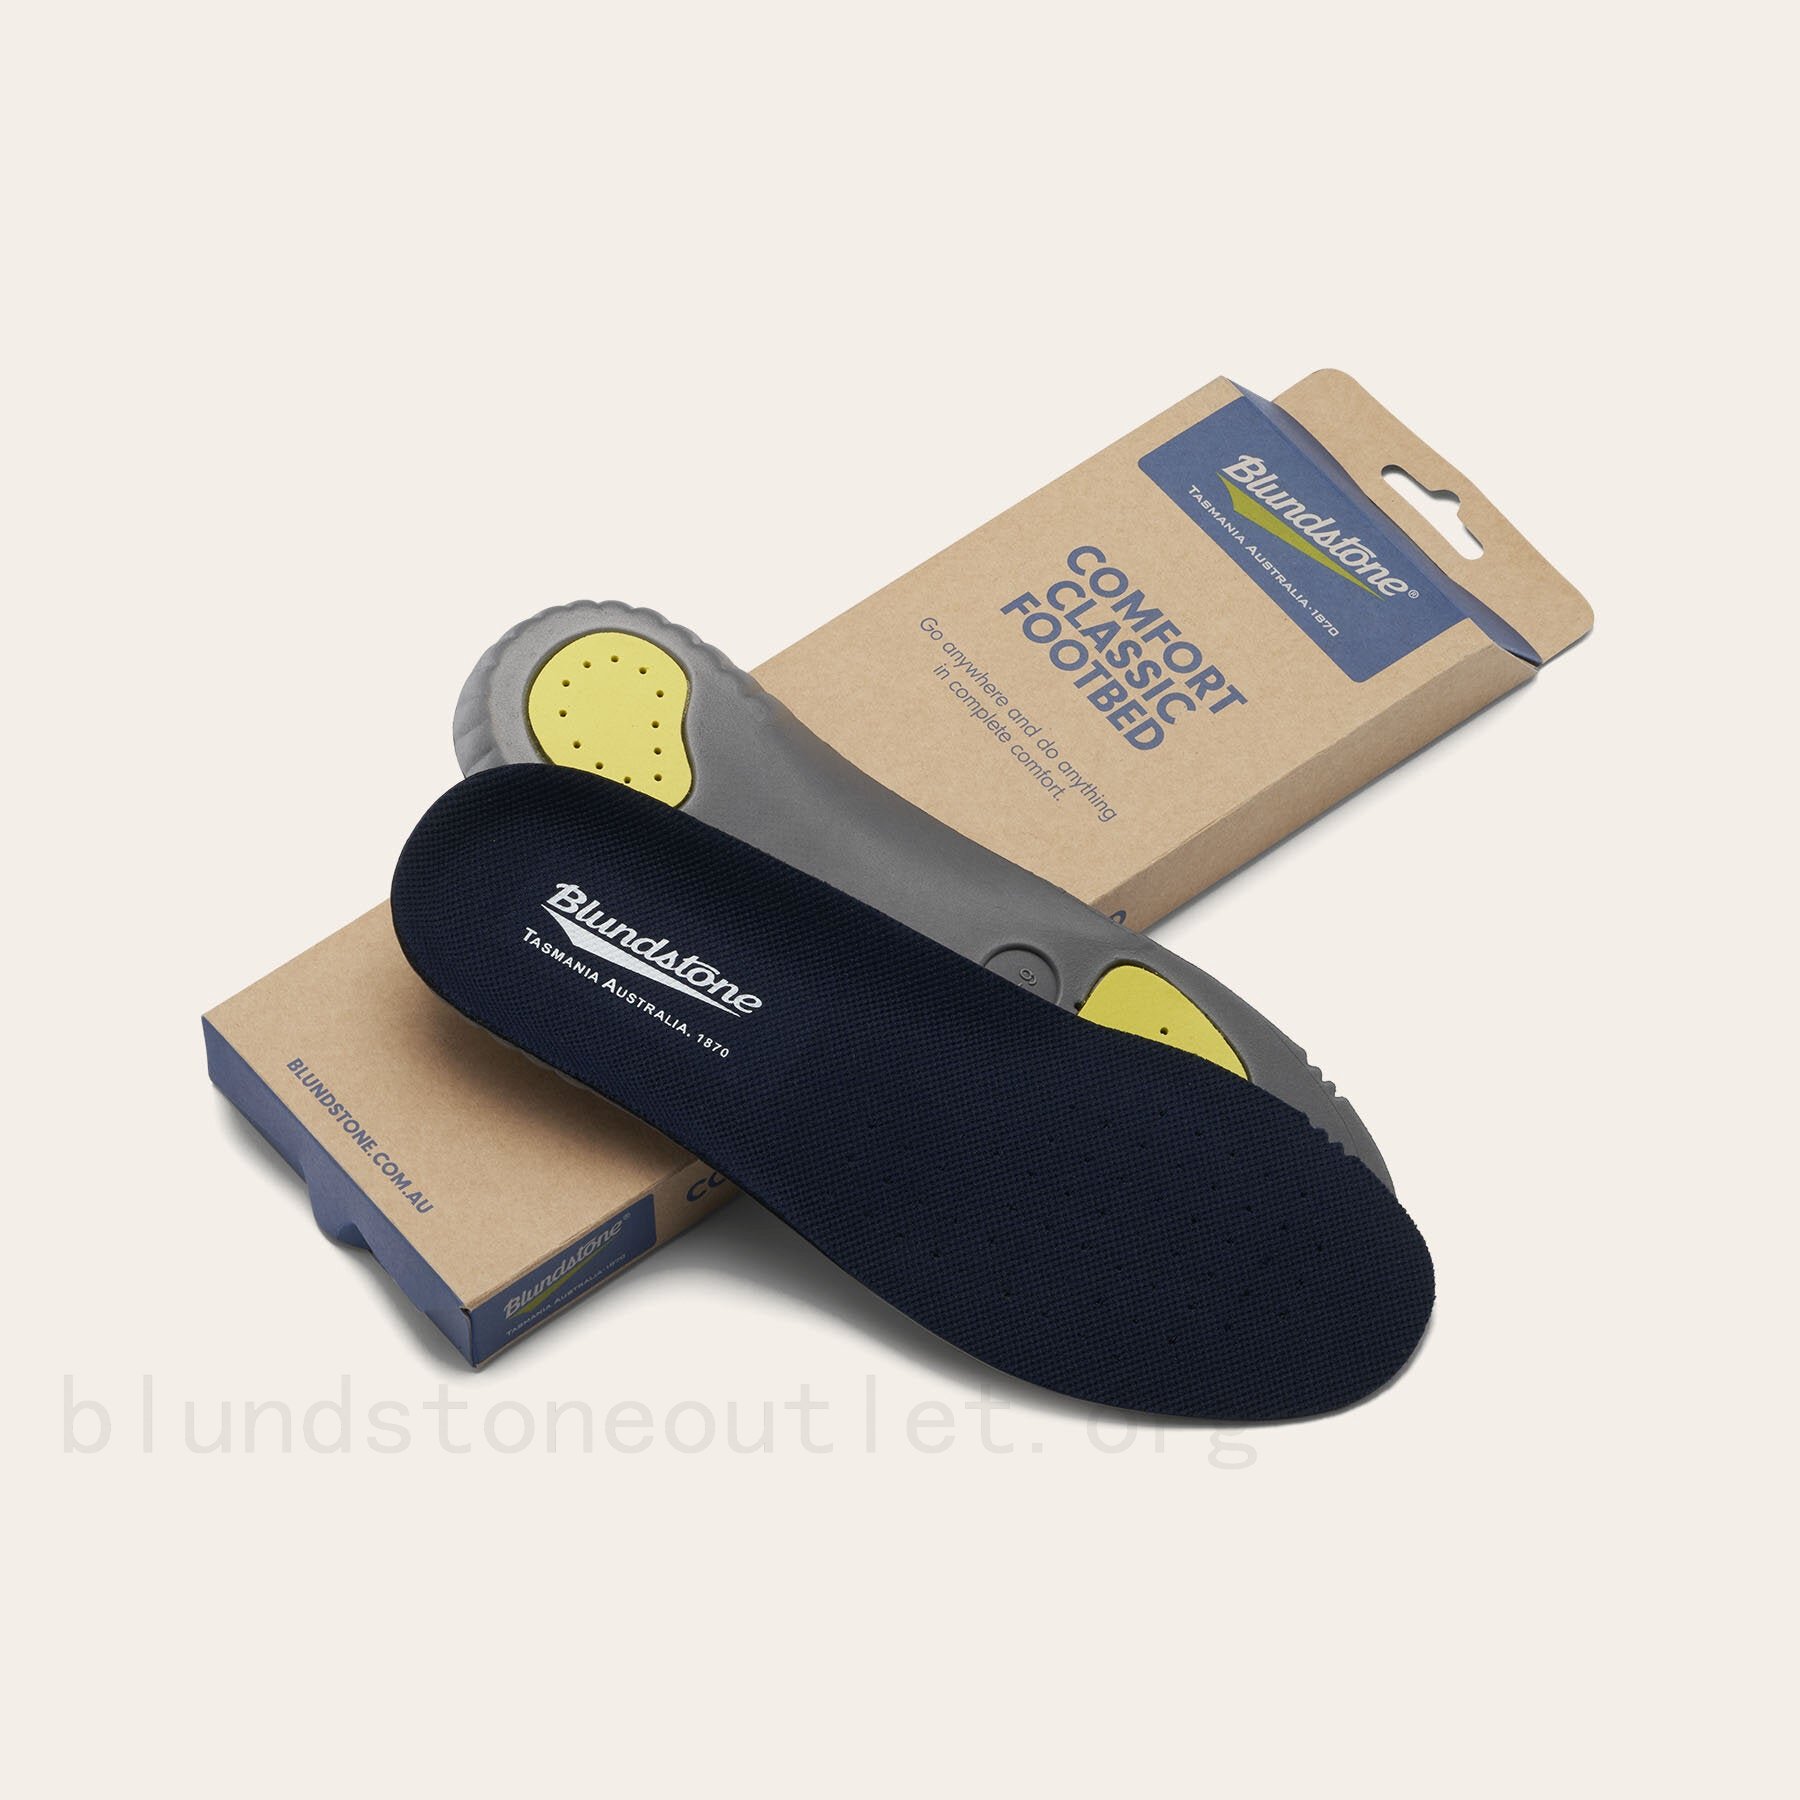 COMFORT CLASSIC FOOTBED blundstone sconto